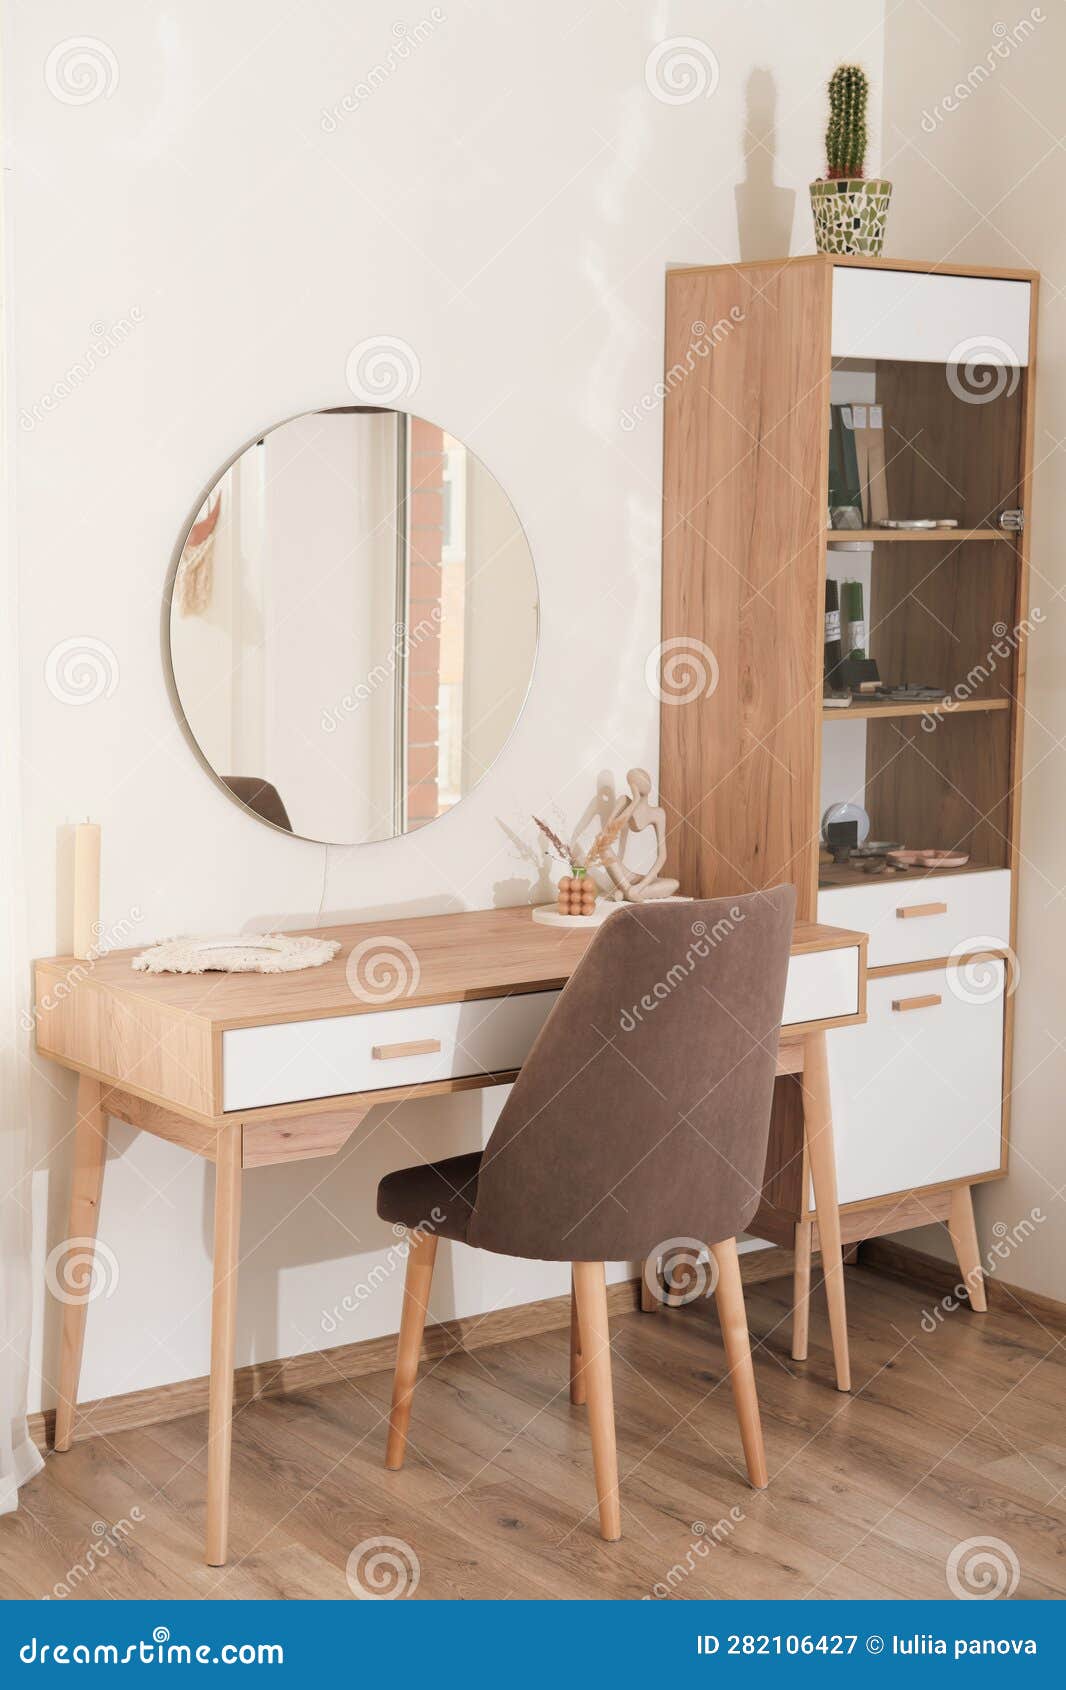 Dressing Table Designs - Apps on Google Play